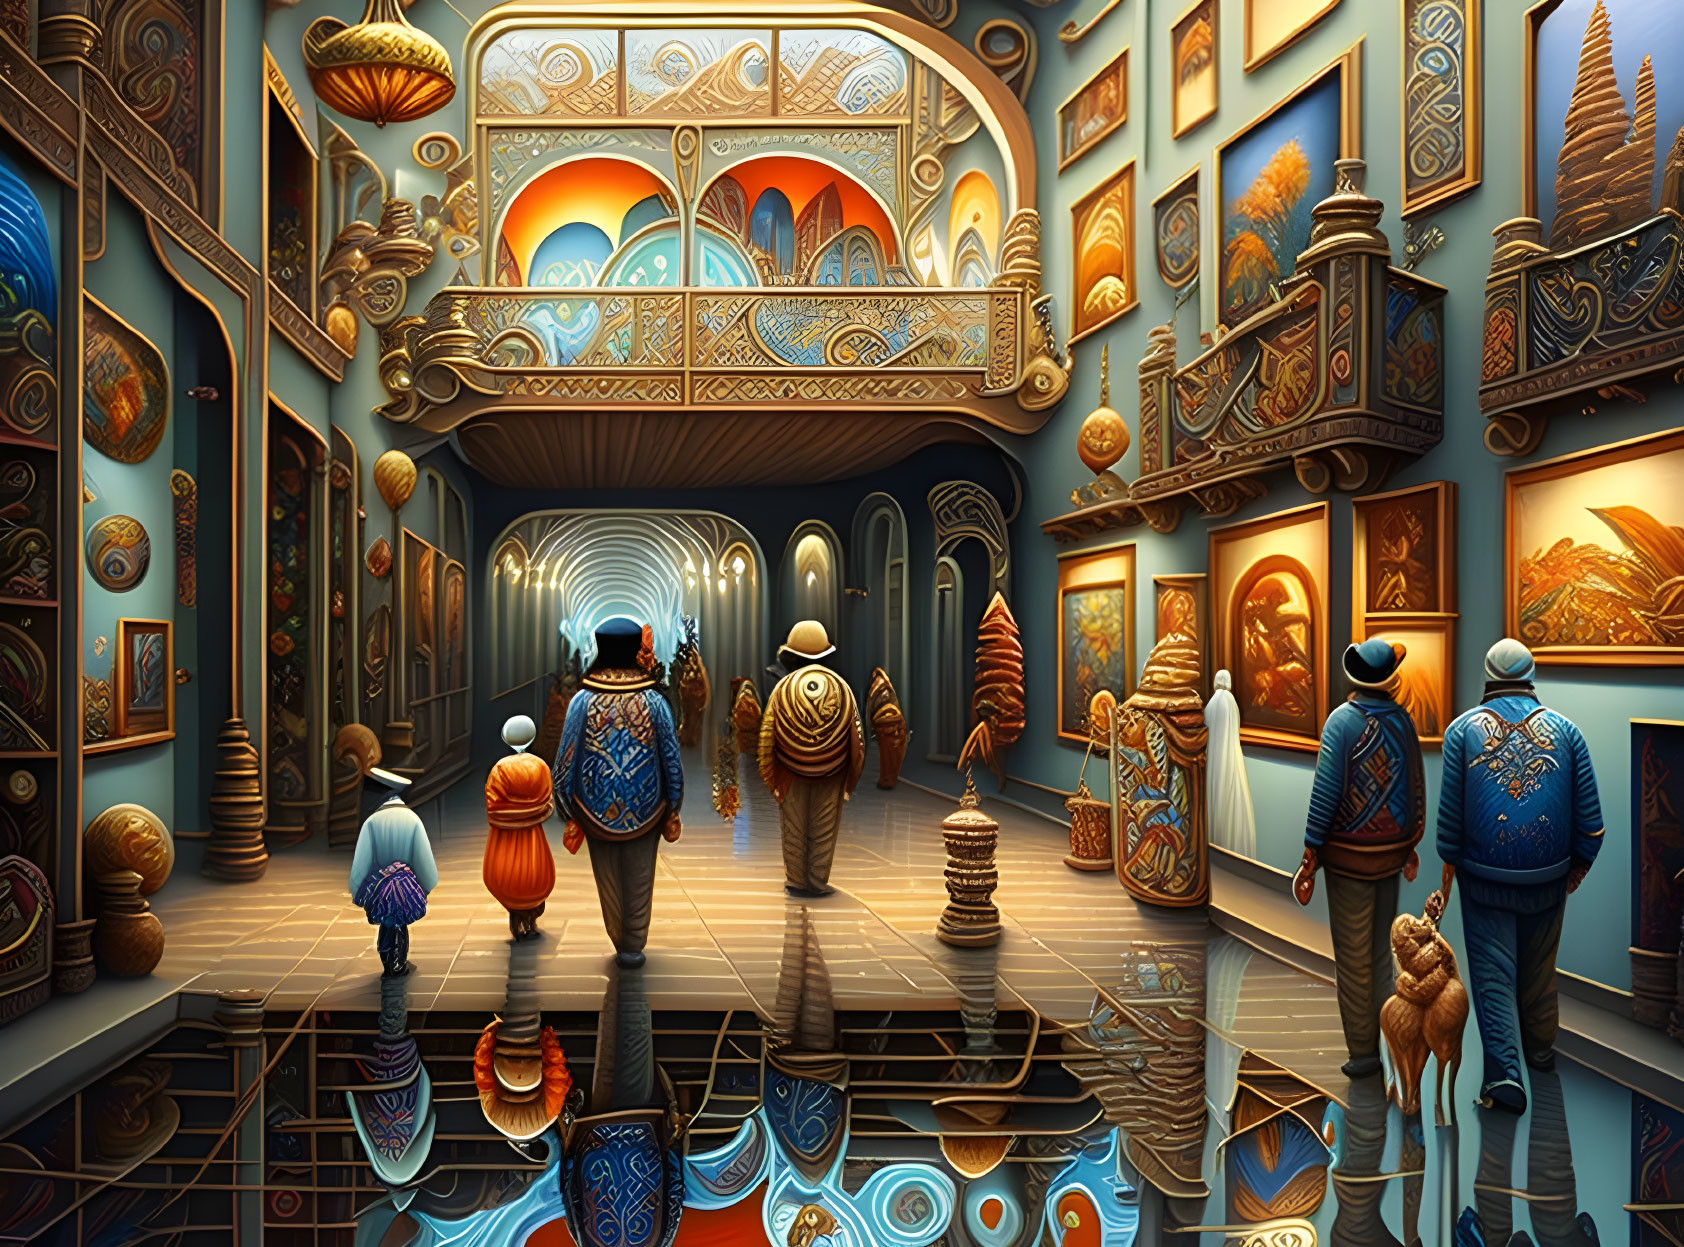 Colorful fantasy scene: People and animals in intricate, glowing hallway.